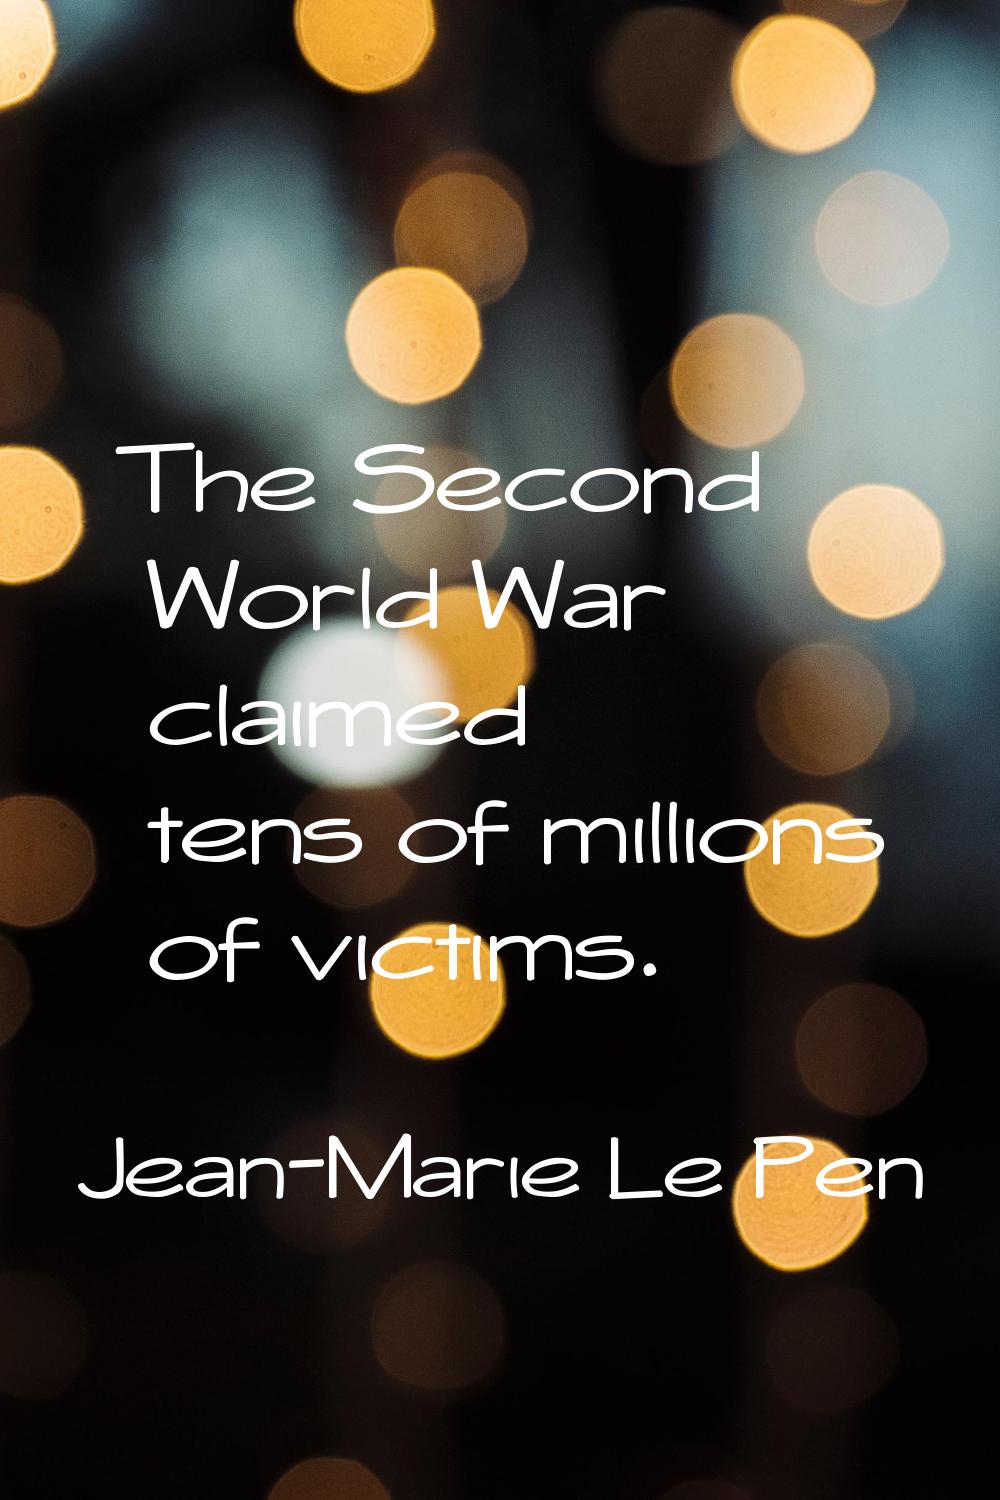 The Second World War claimed tens of millions of victims.